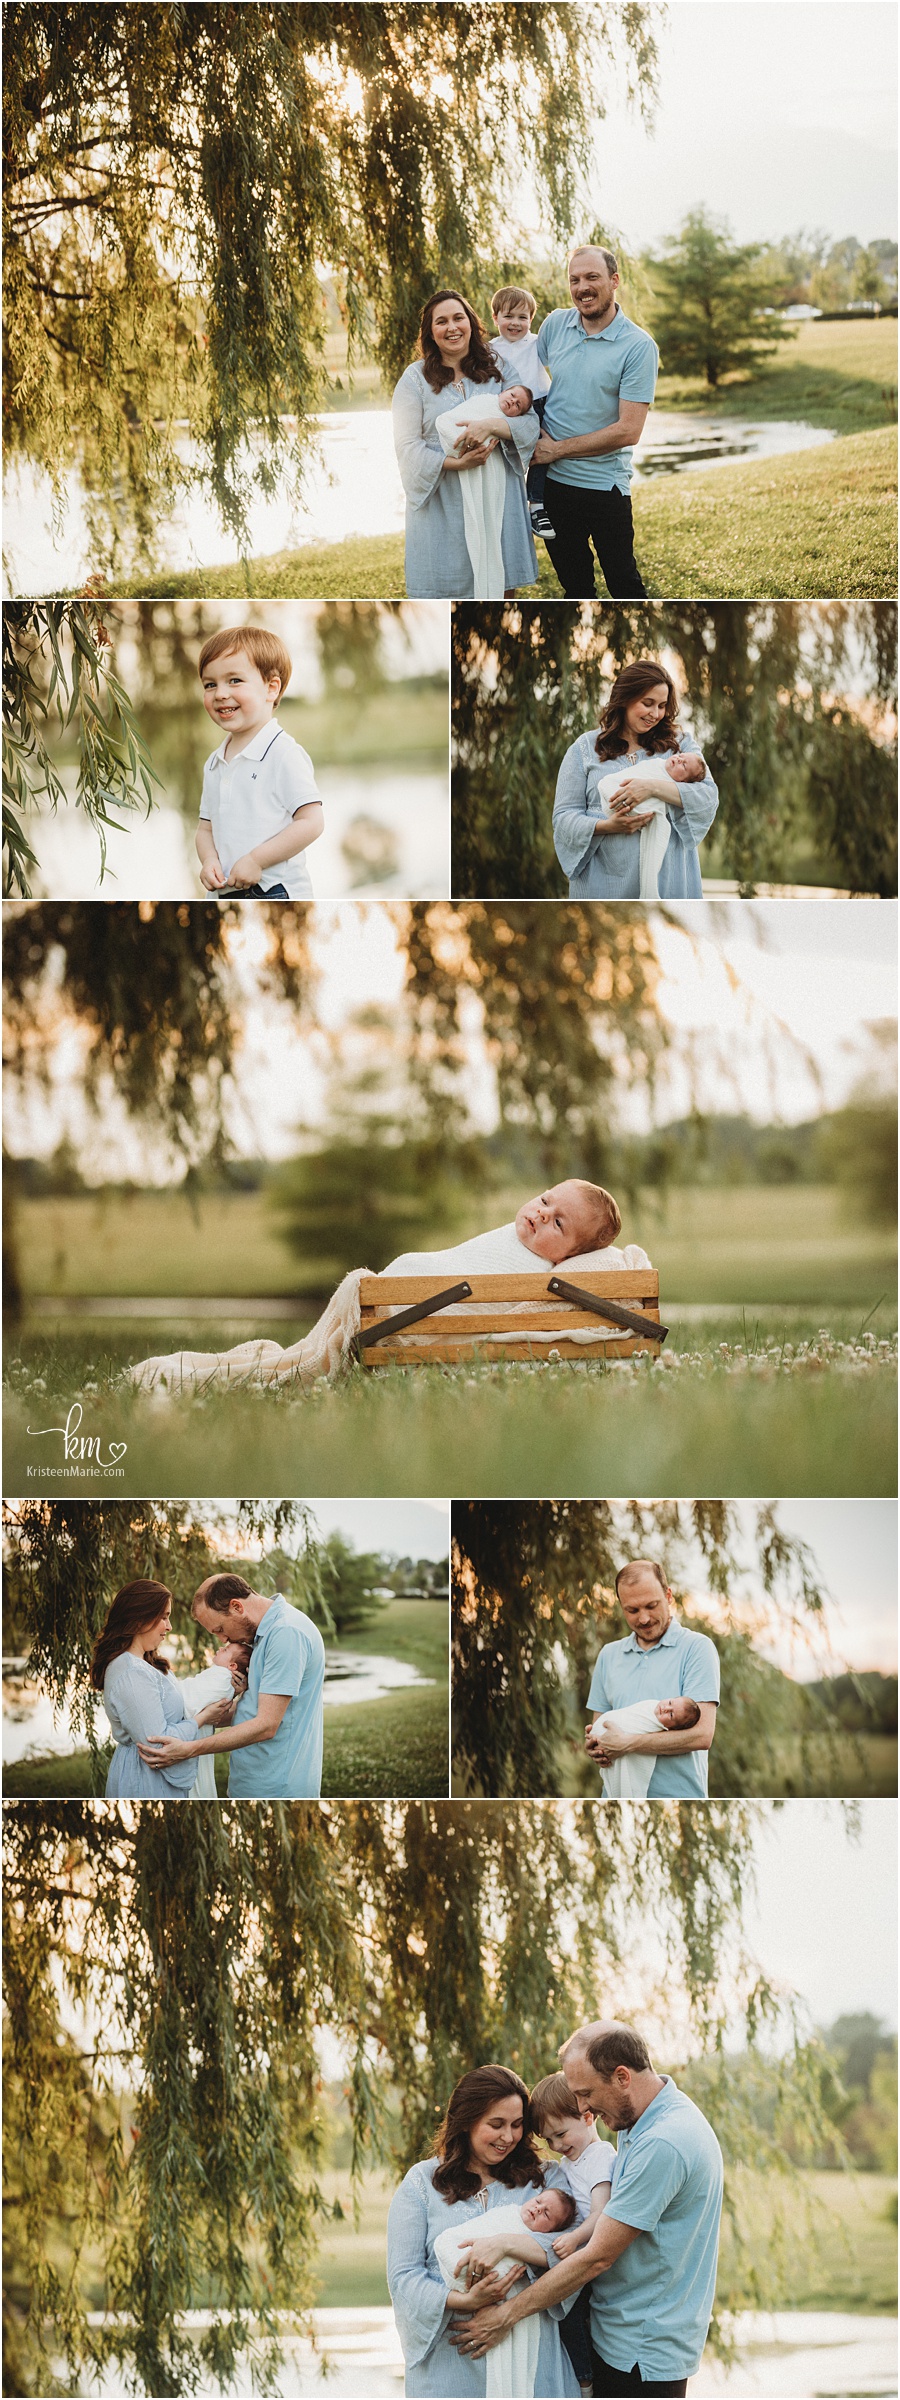 Outdoor newborn photography in Indianapolis, IN